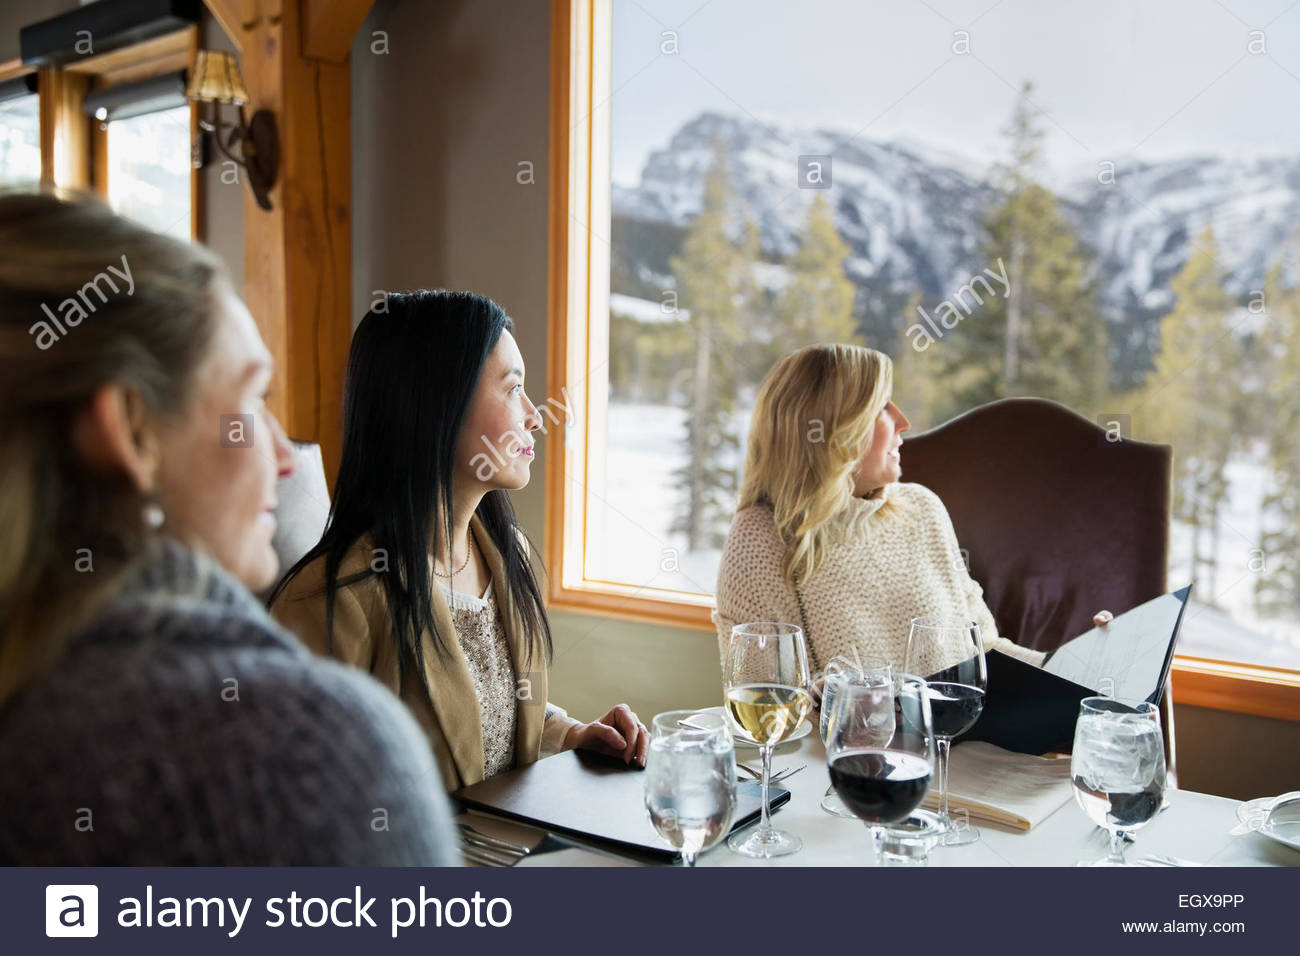 Women at restaurant table looking out window Stock Photo